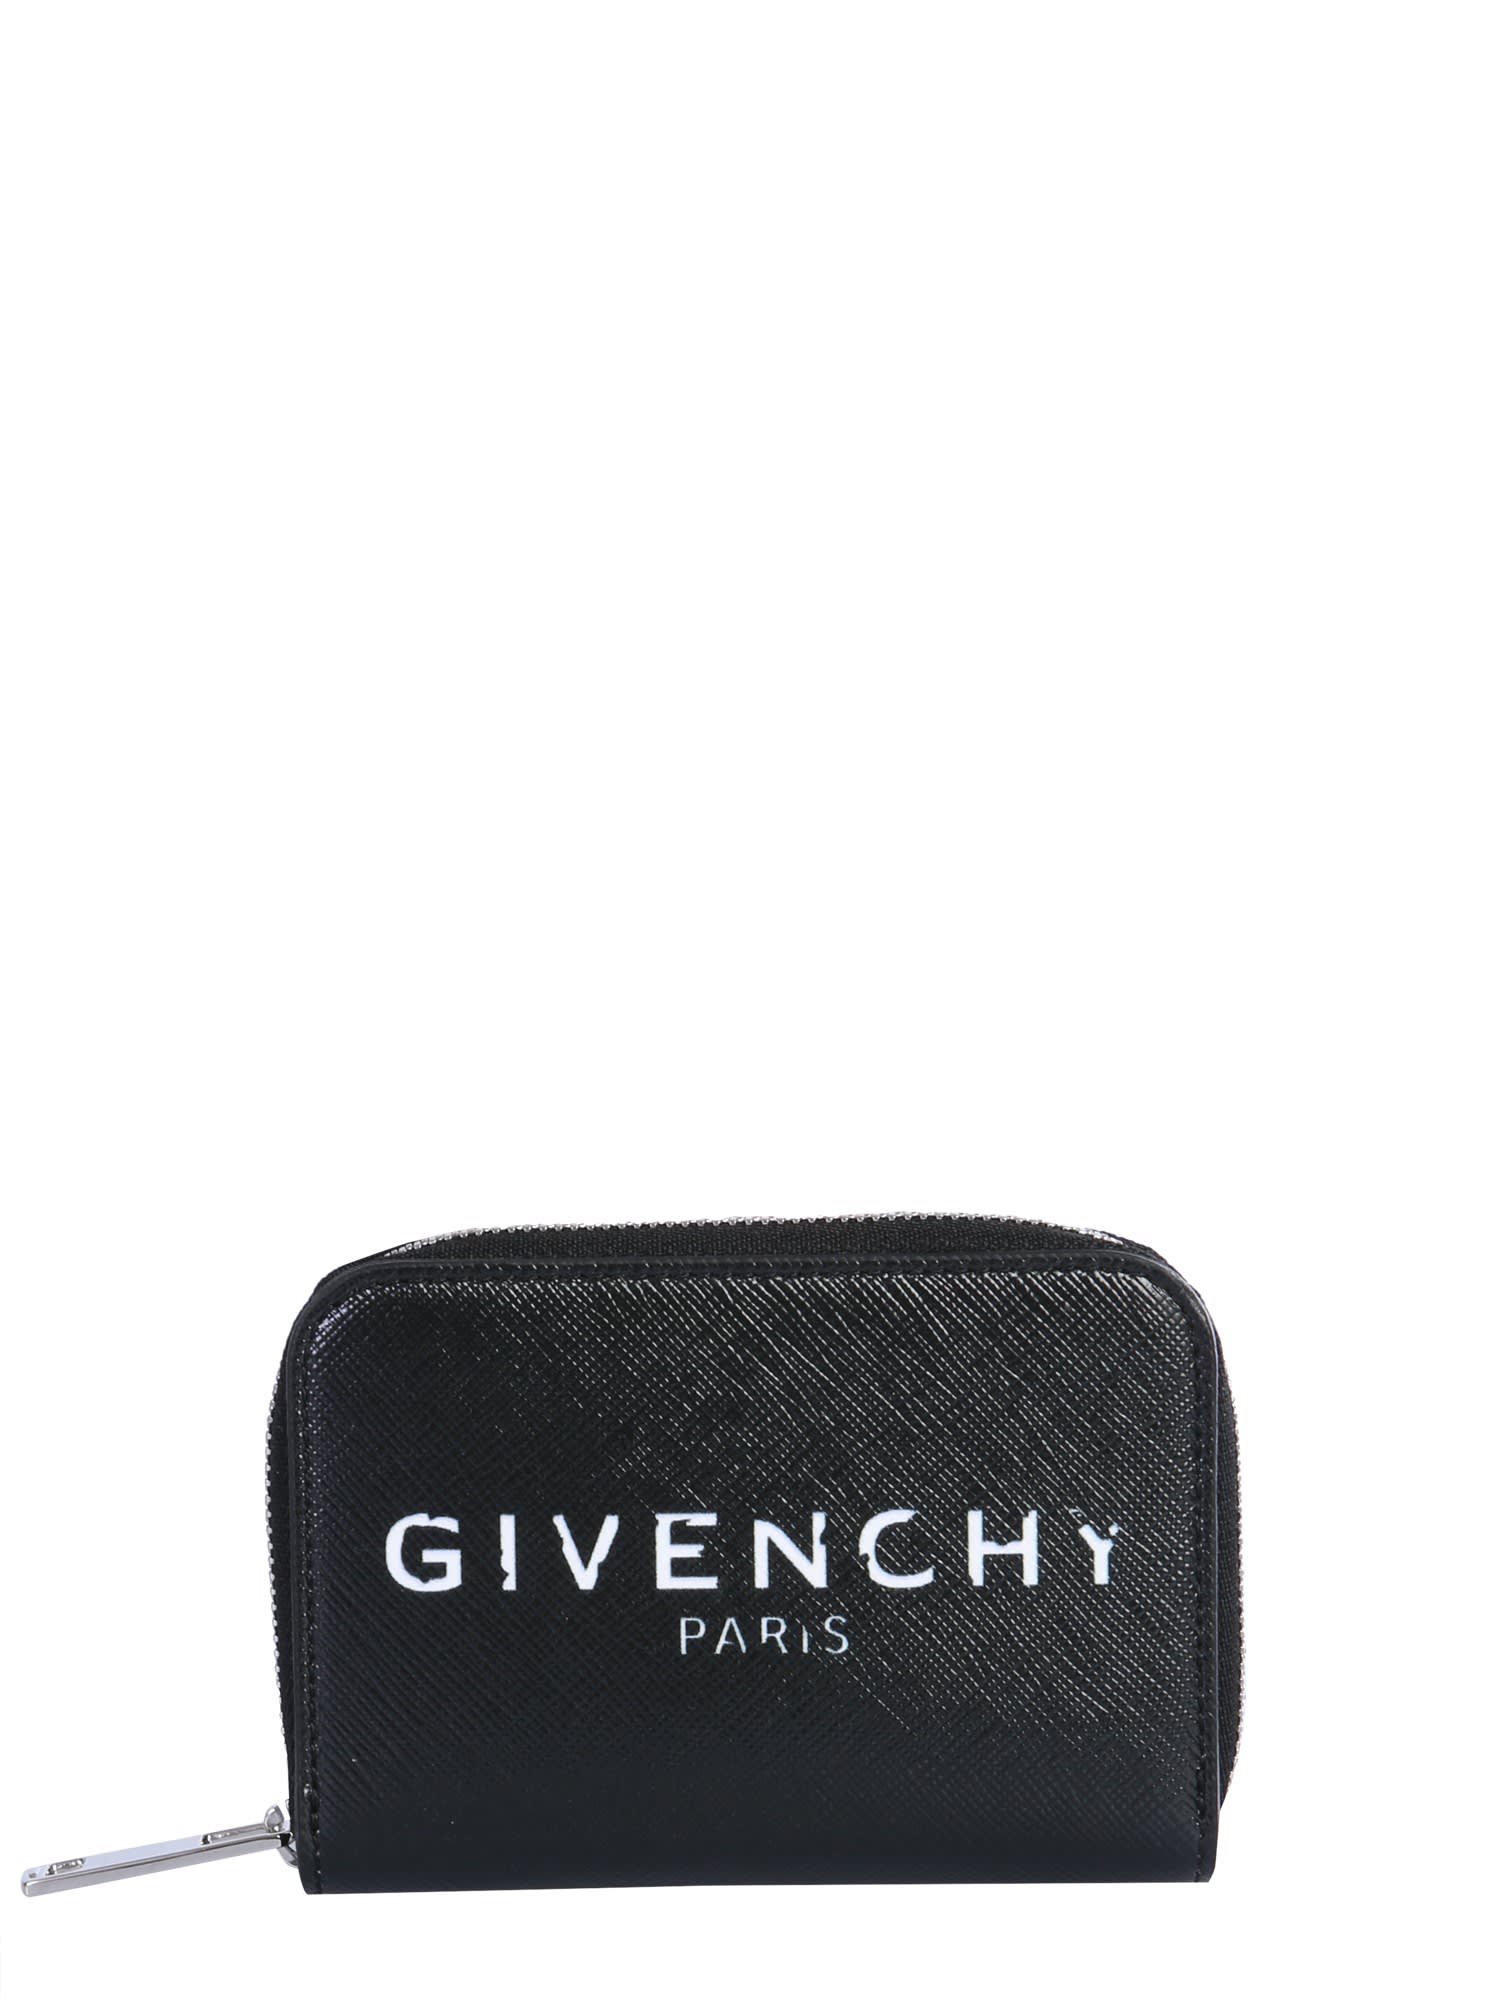 GIVENCHY CARD HOLDER WITH LOGO,11282442